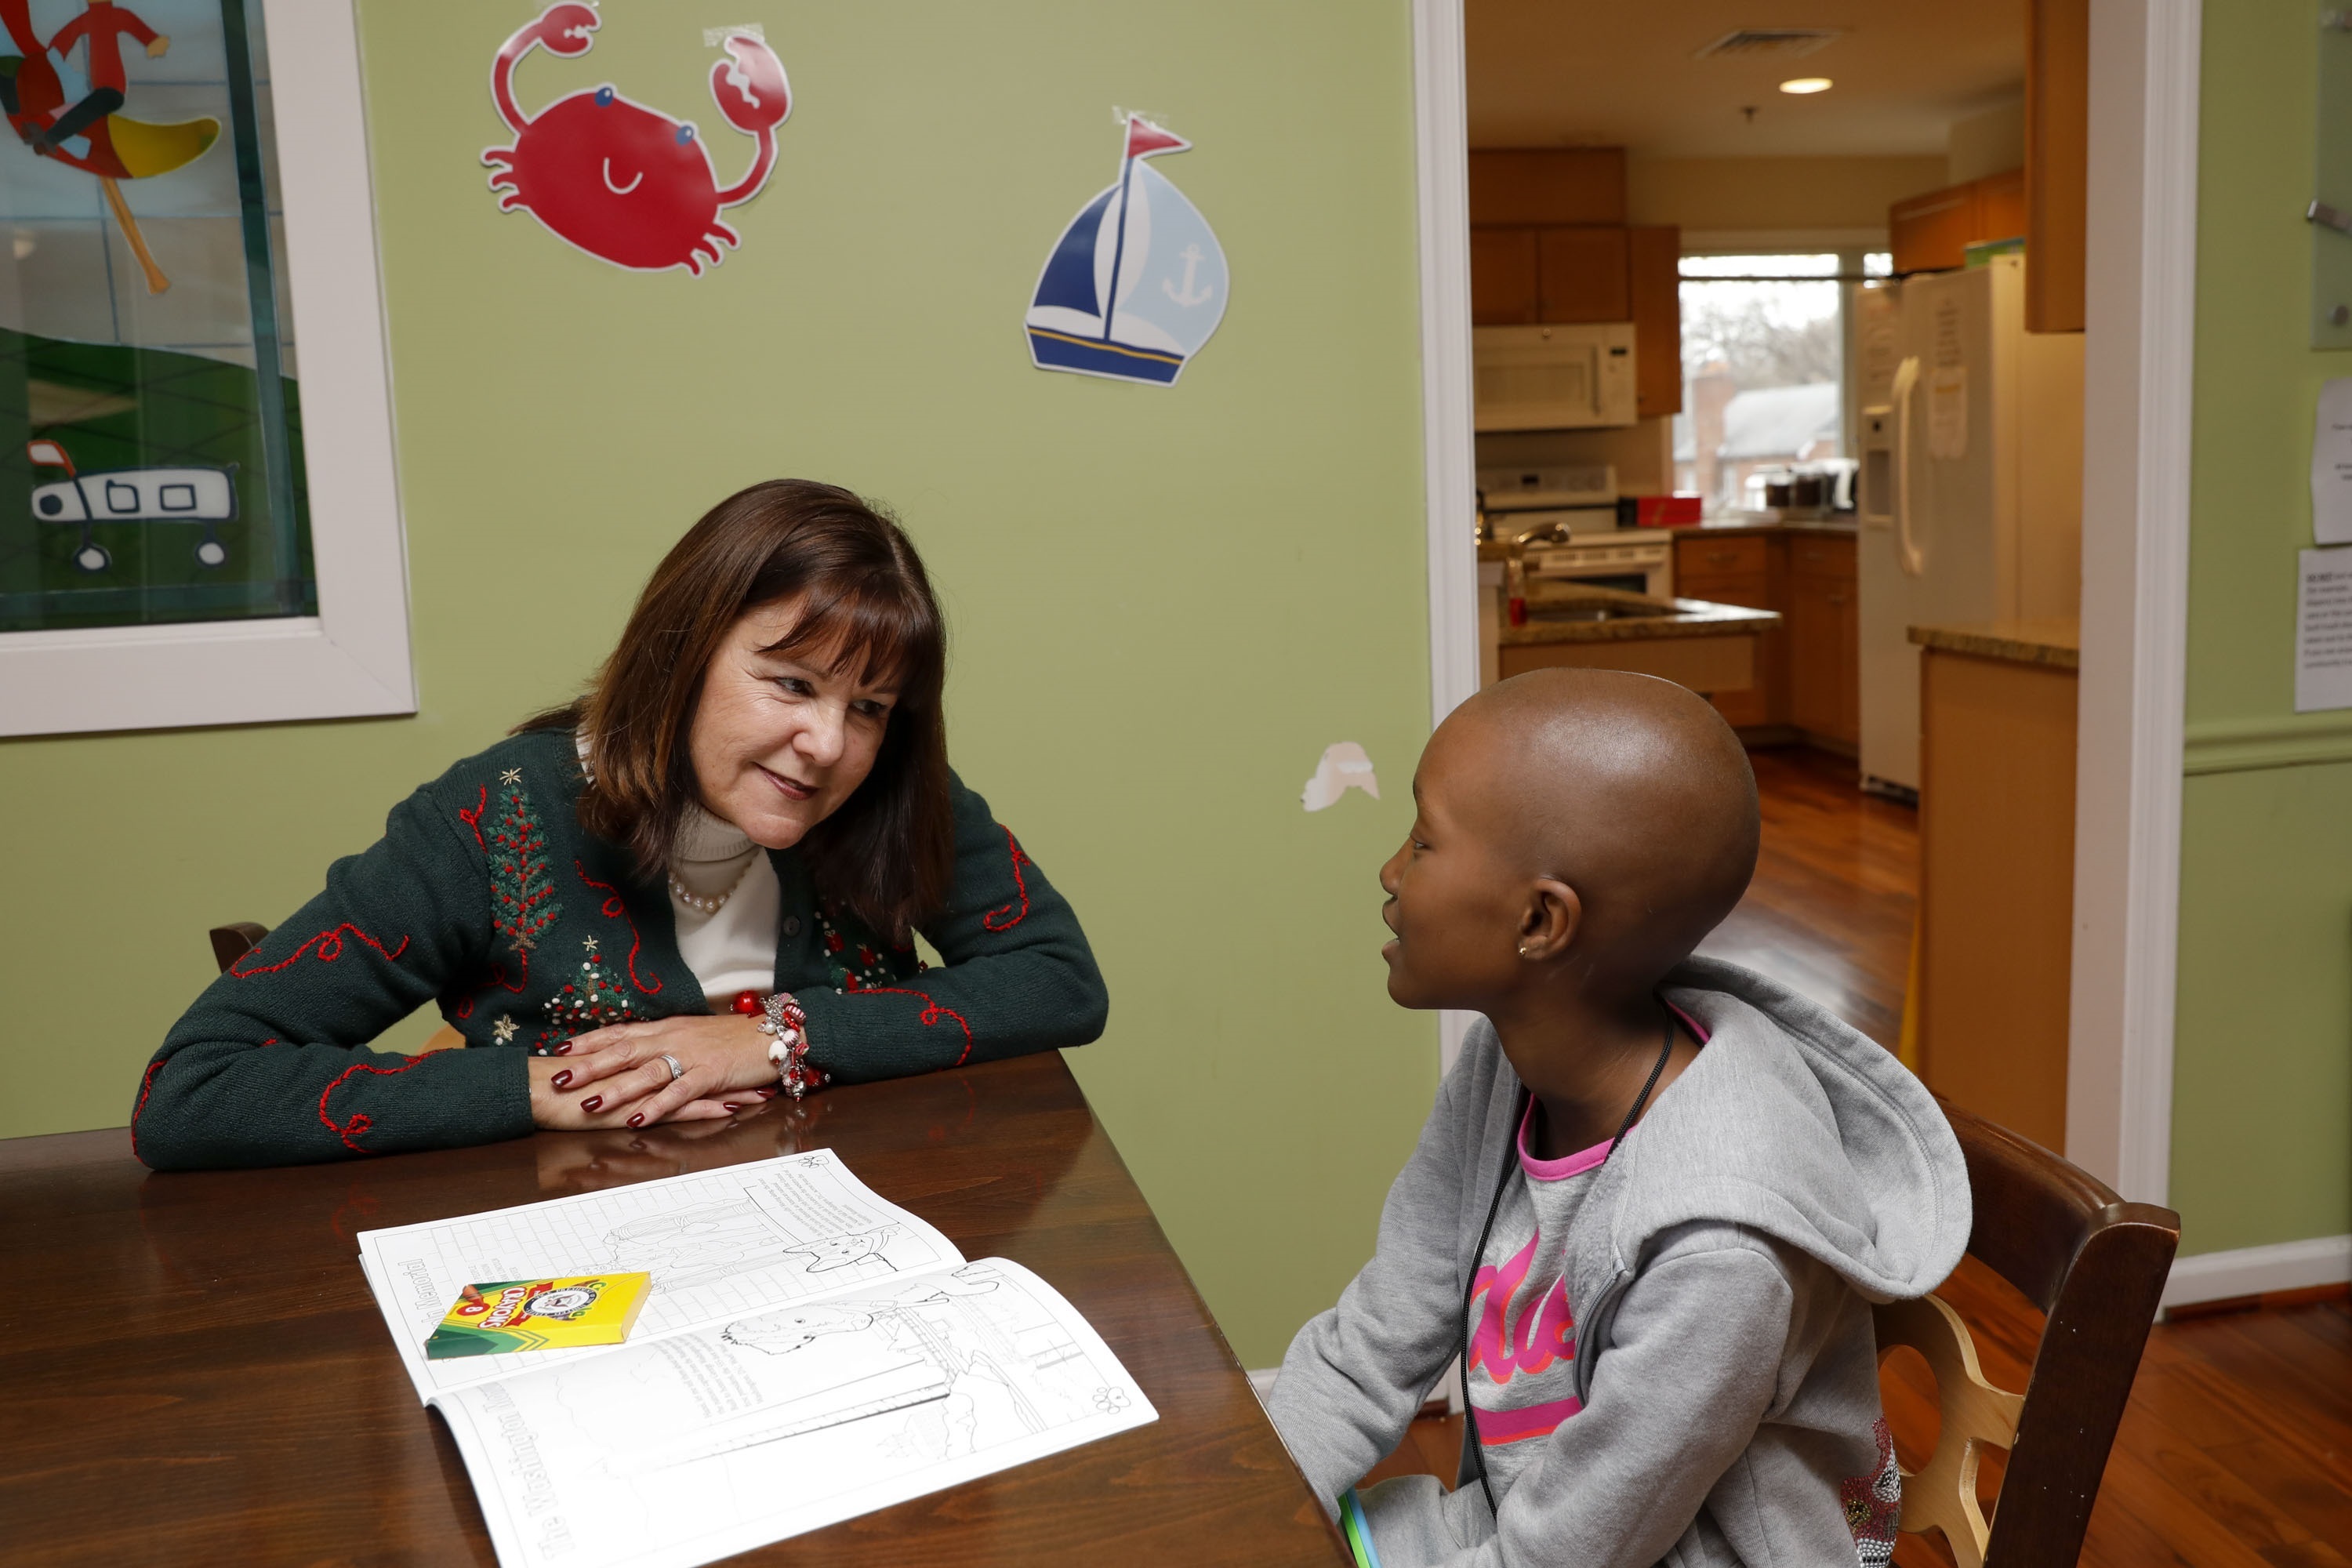 Mrs. Pence visits patients at Ronald McDonald House Charities of Greater Washington, DC, Tuesday, December 12, 2017, in Washington, D.C. (Official White House by Amy Rossetti)